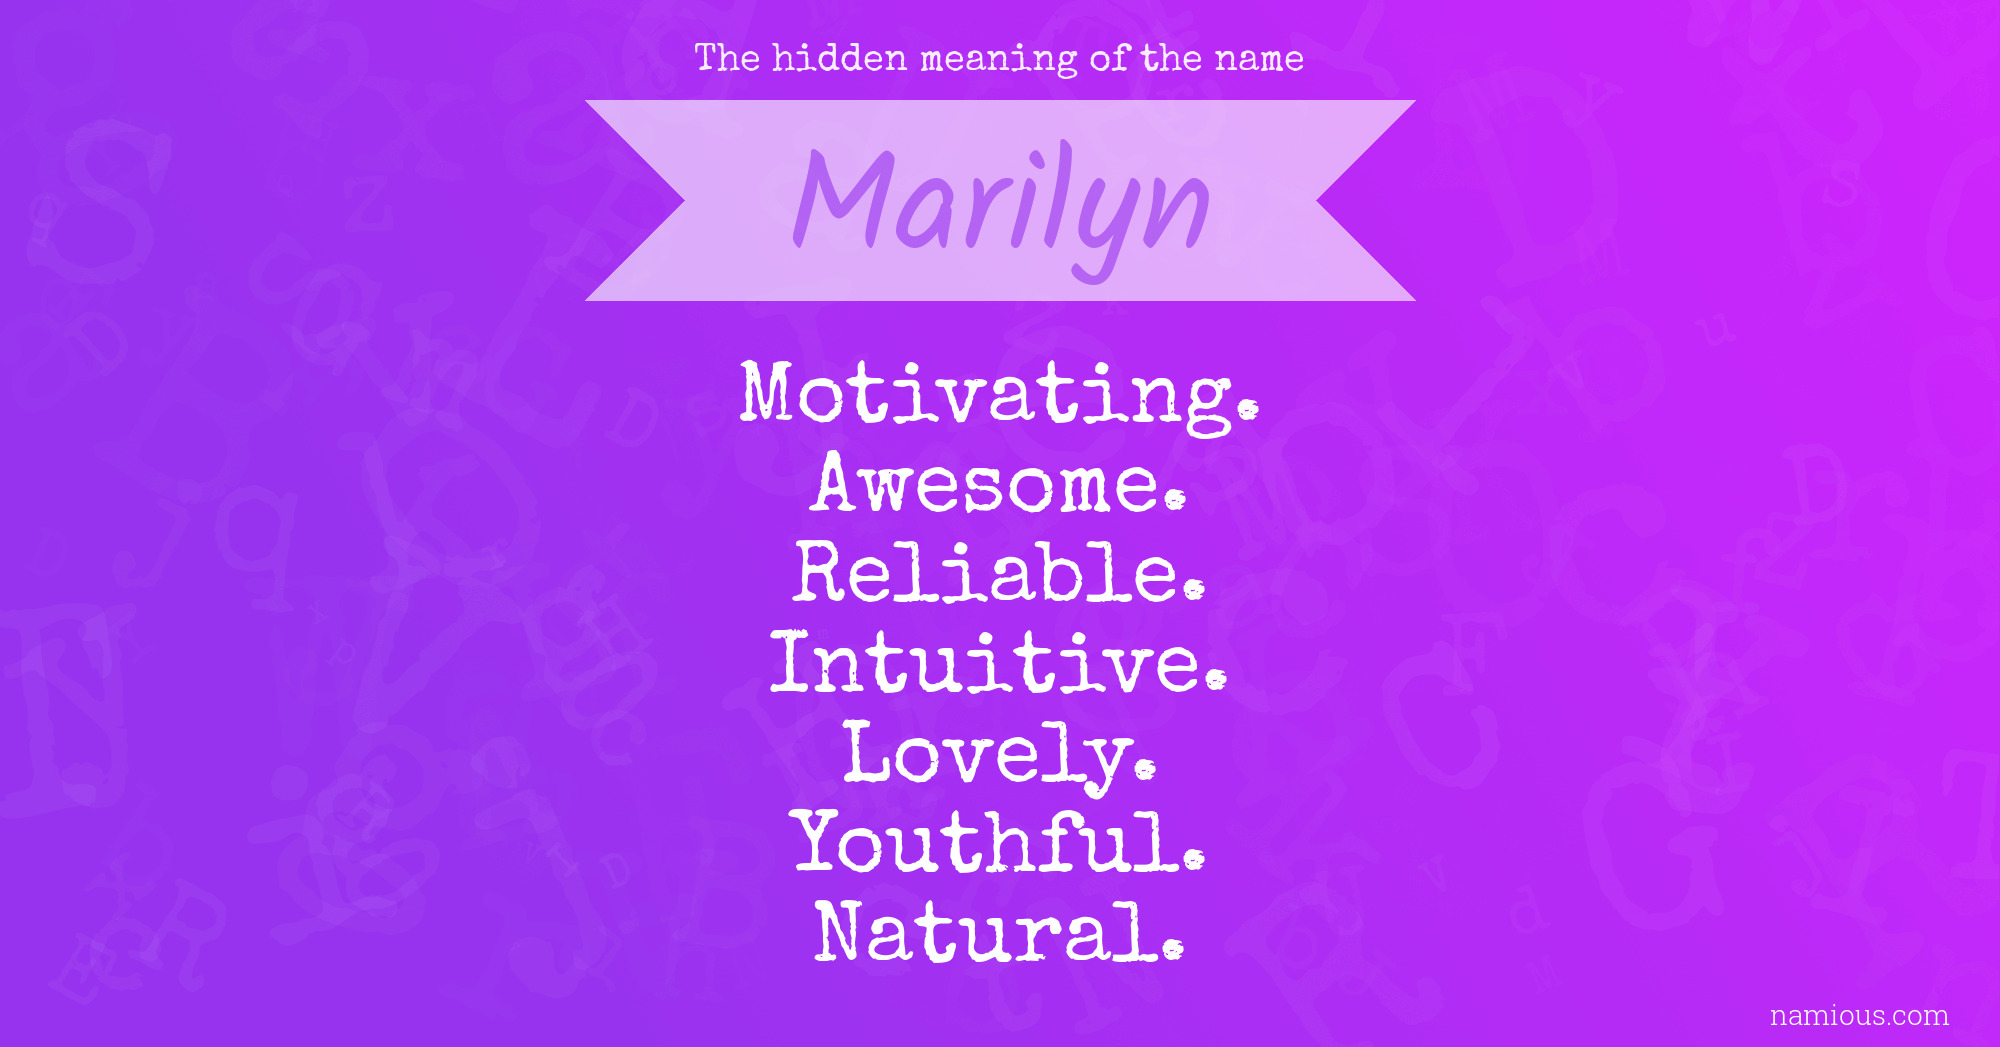 The hidden meaning of the name Marilyn